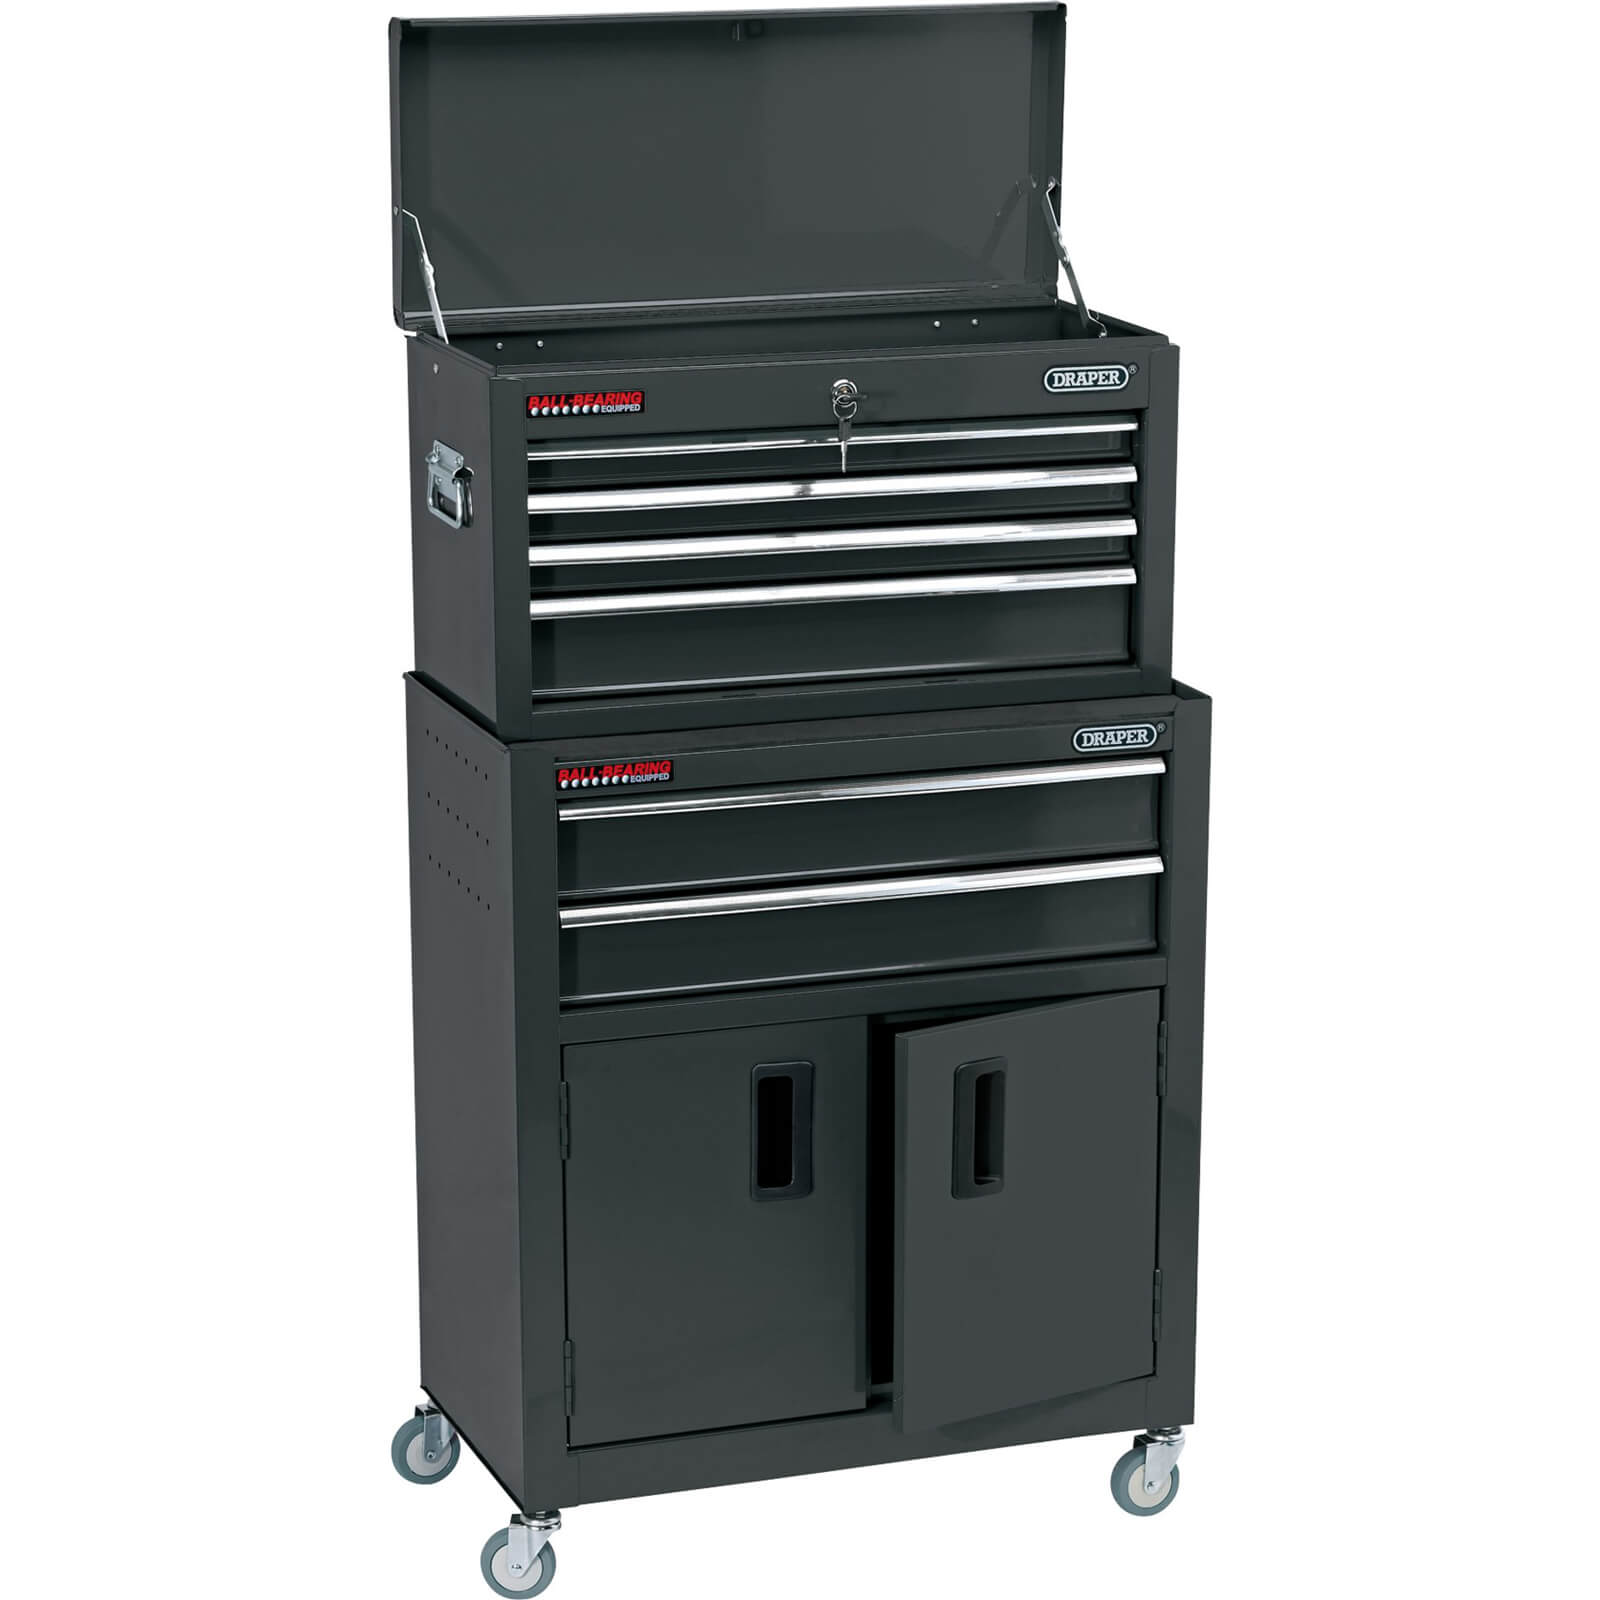 Image of Draper 6 Drawer Roller Cabinet and Tool Chest Combination Black